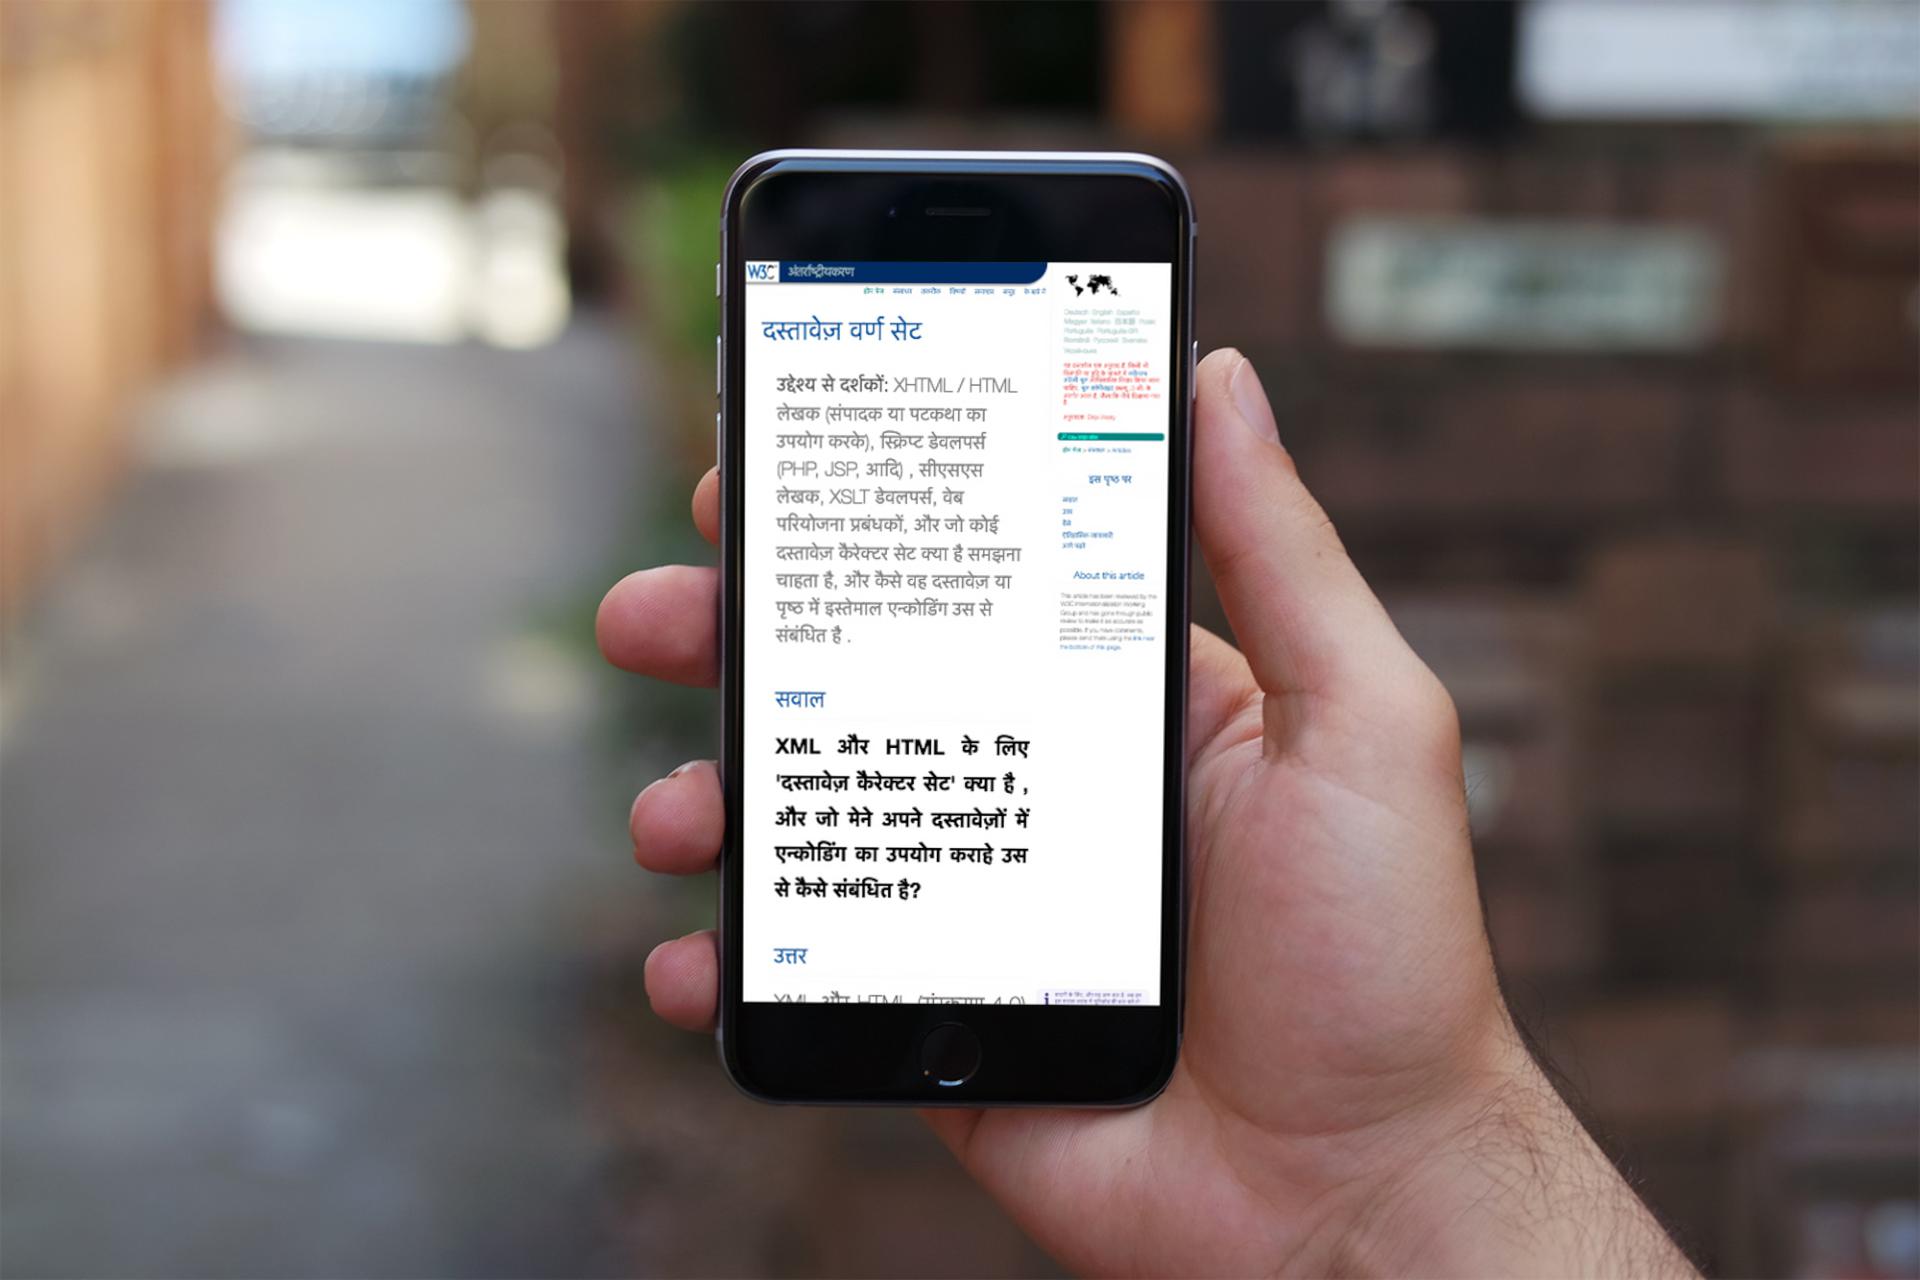 [Photo: A hand with a mobile phone that shows a page in Hindi from the W3C site]